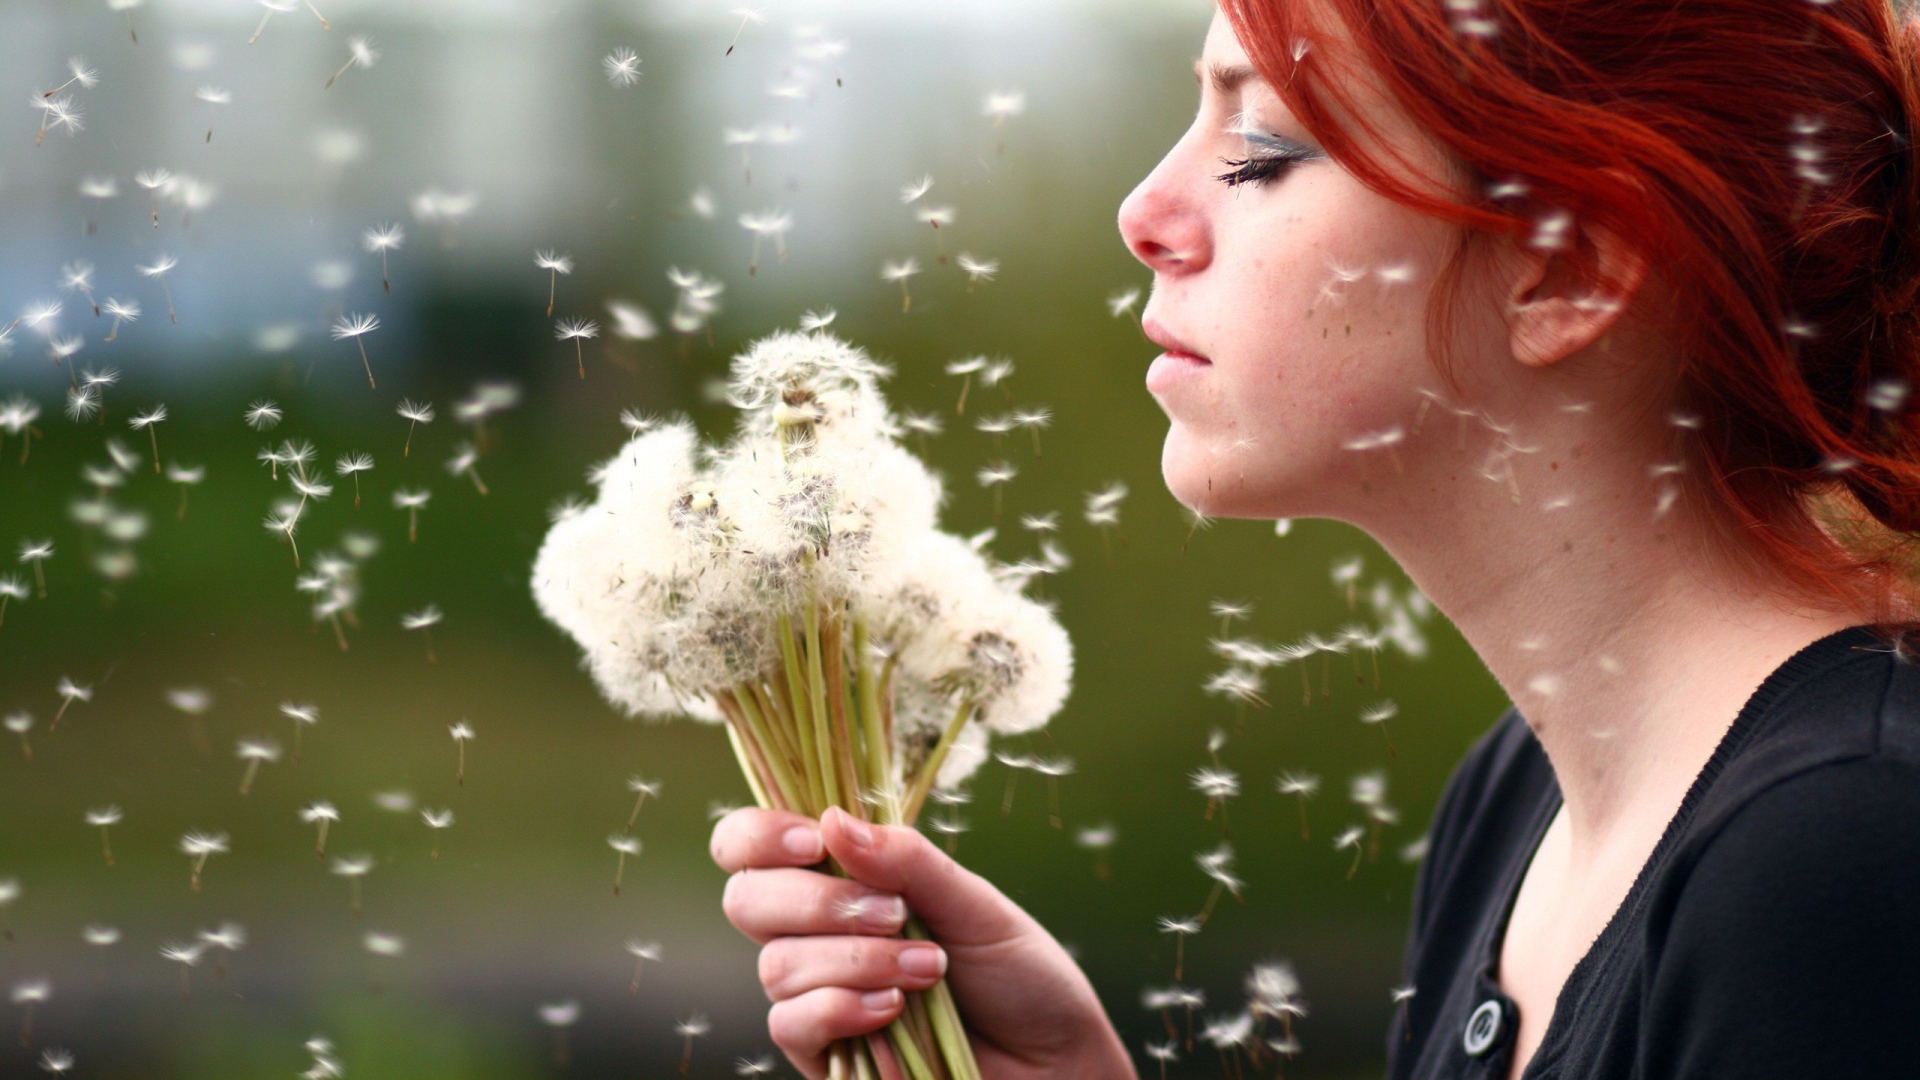 Red-haired girl with a bouquet of mature dandelions